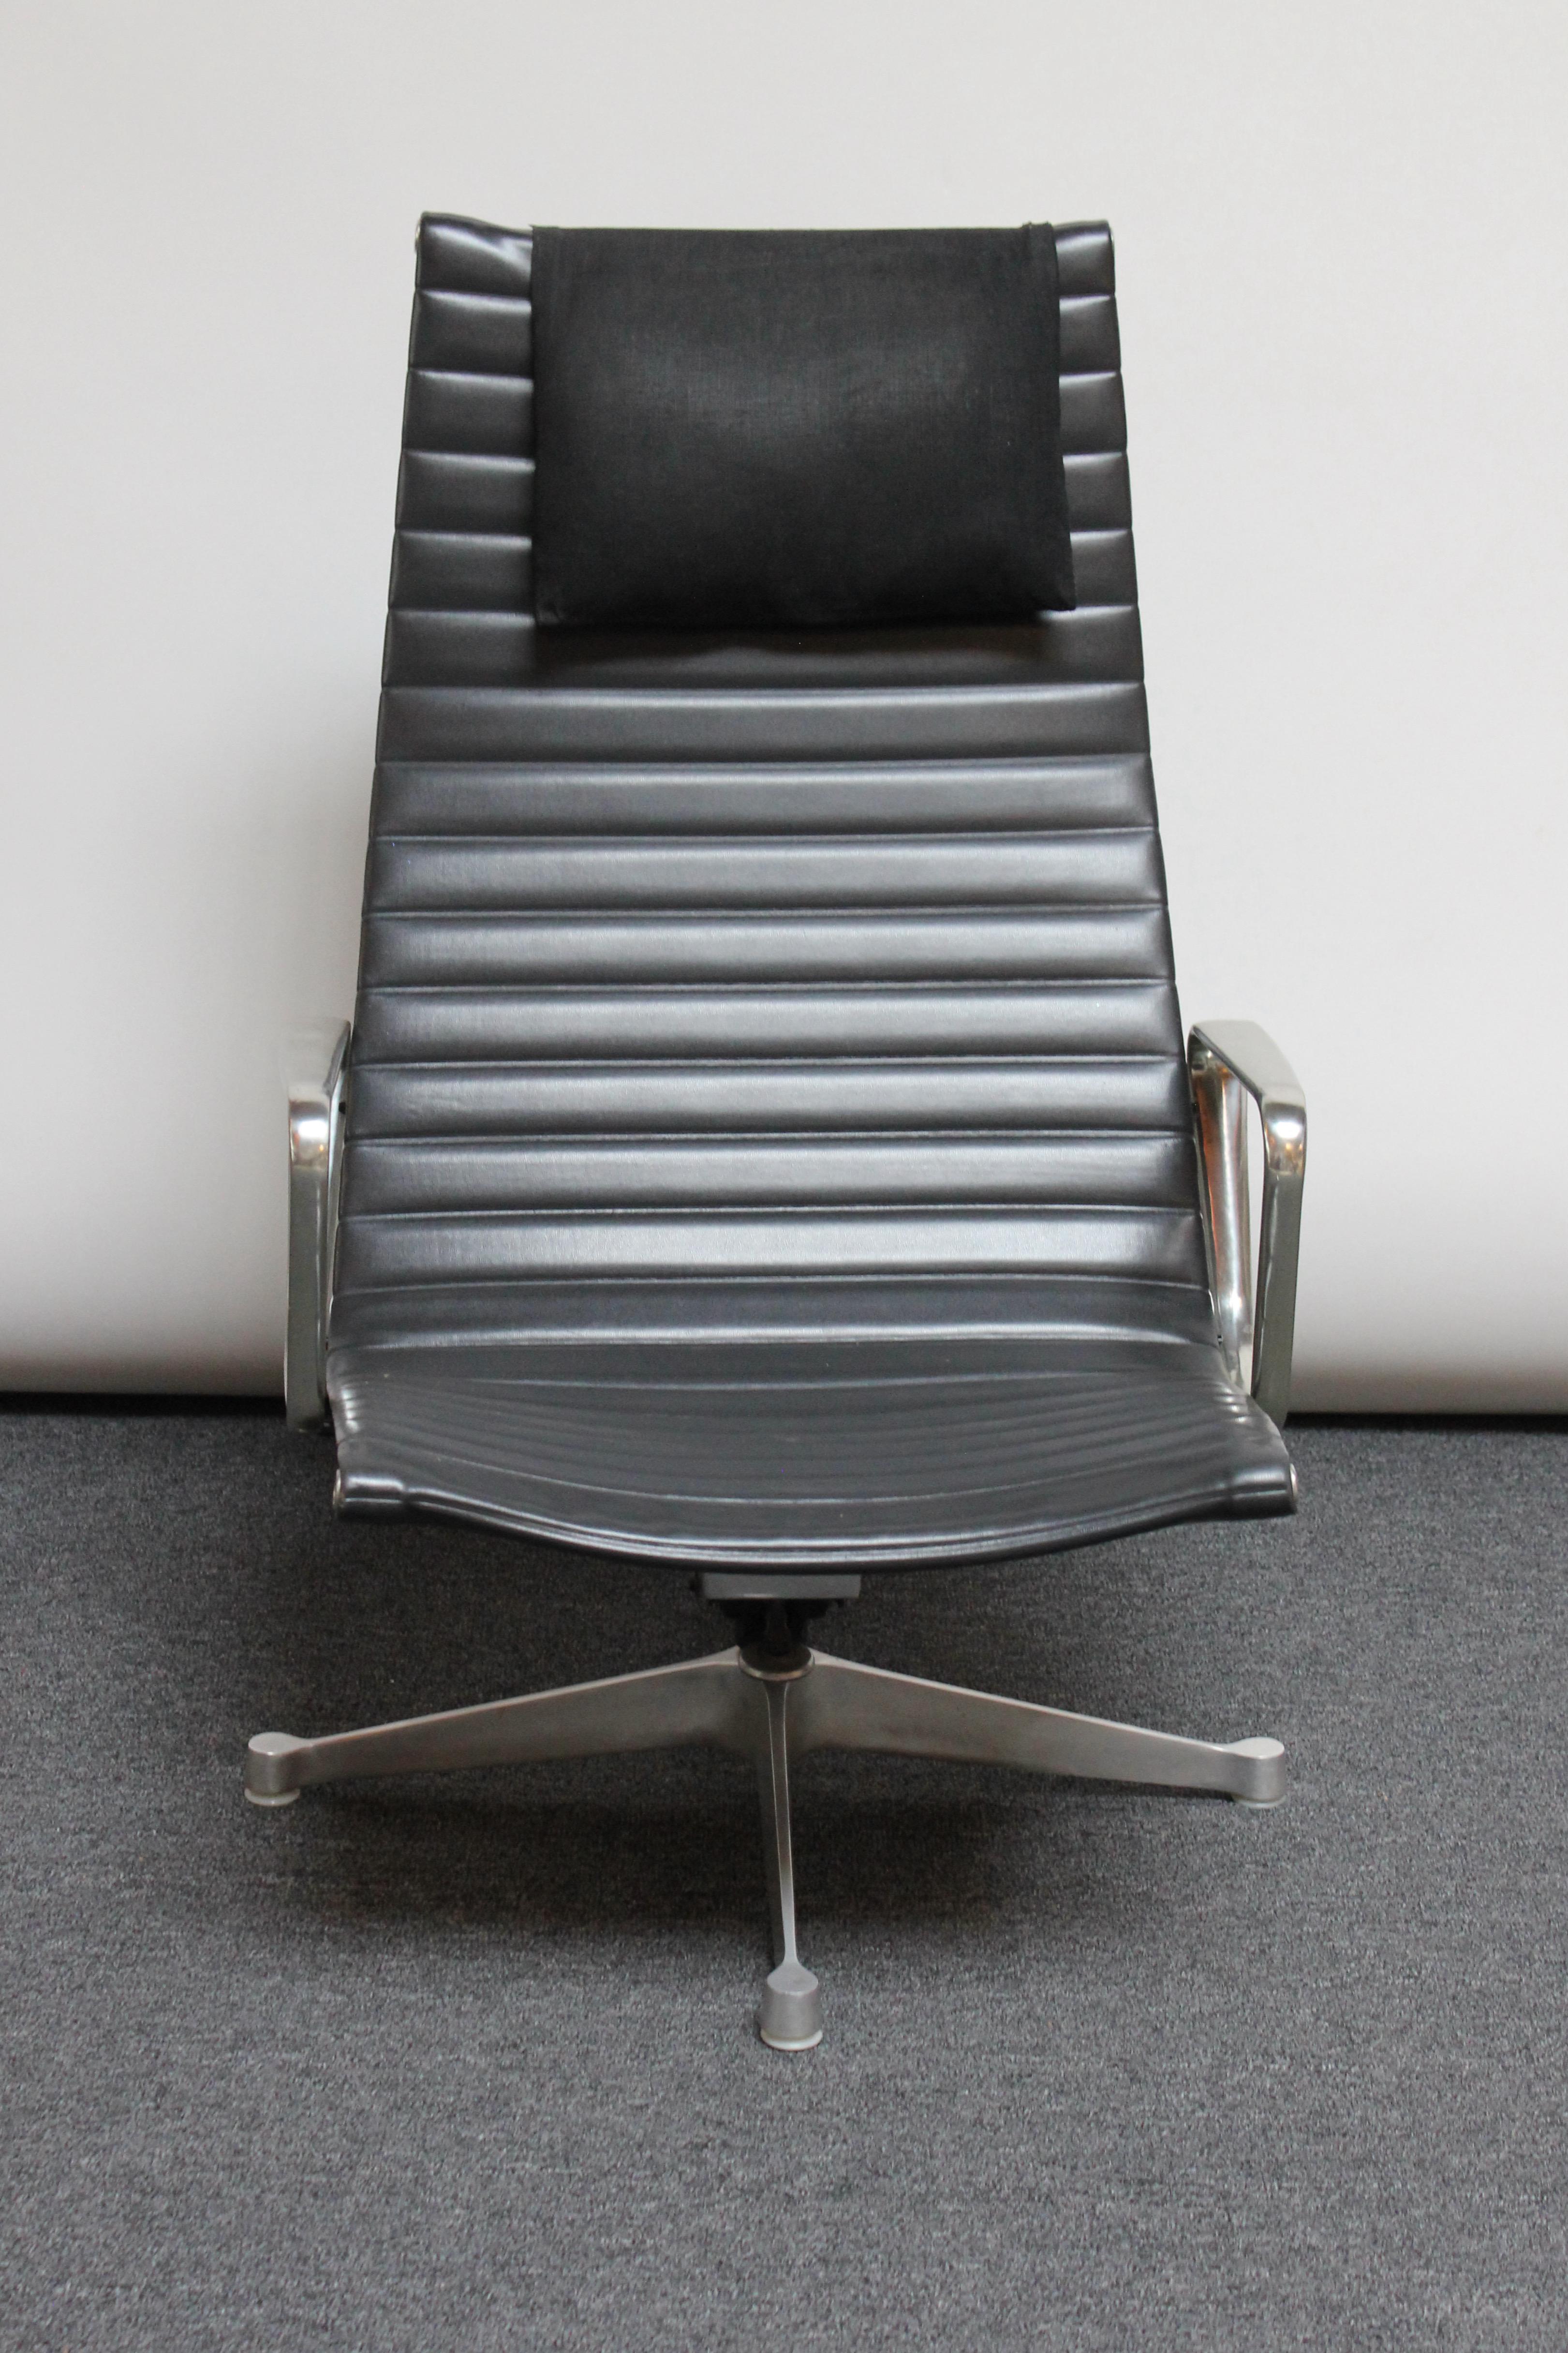 Early high-back lounge chair with swivel / tilt function designed by Charles and Ray Eames and manufactured by Herman Miller as part of the Aluminum Group collection. Composed of black channelled vinyl seat with linen cushion headrest on four-point